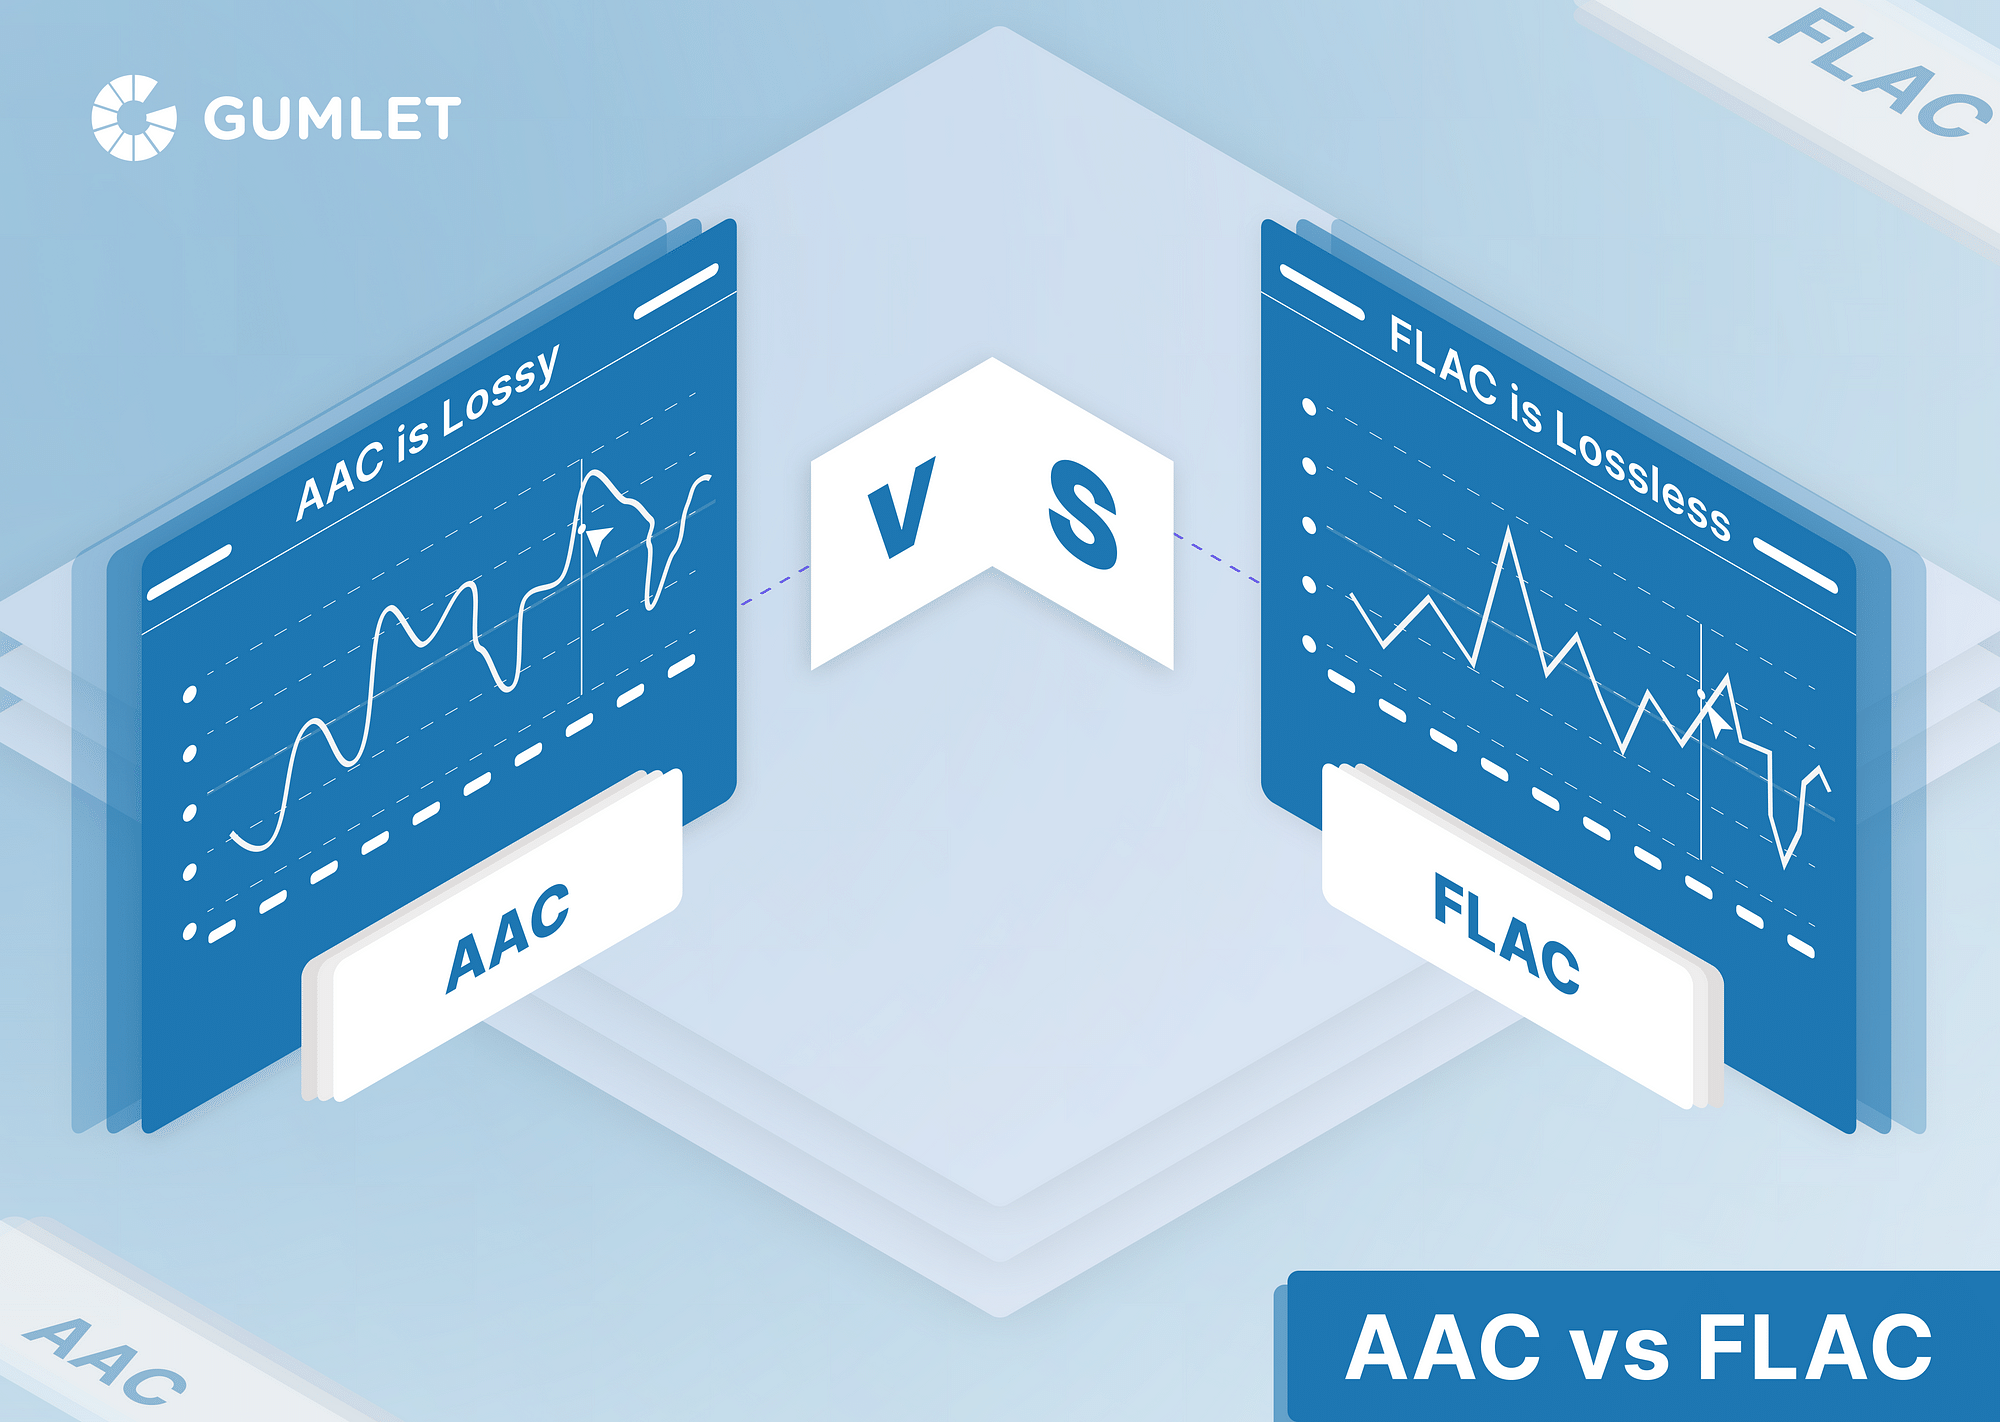 AAC vs. FLAC: Which is the best for your Audio?